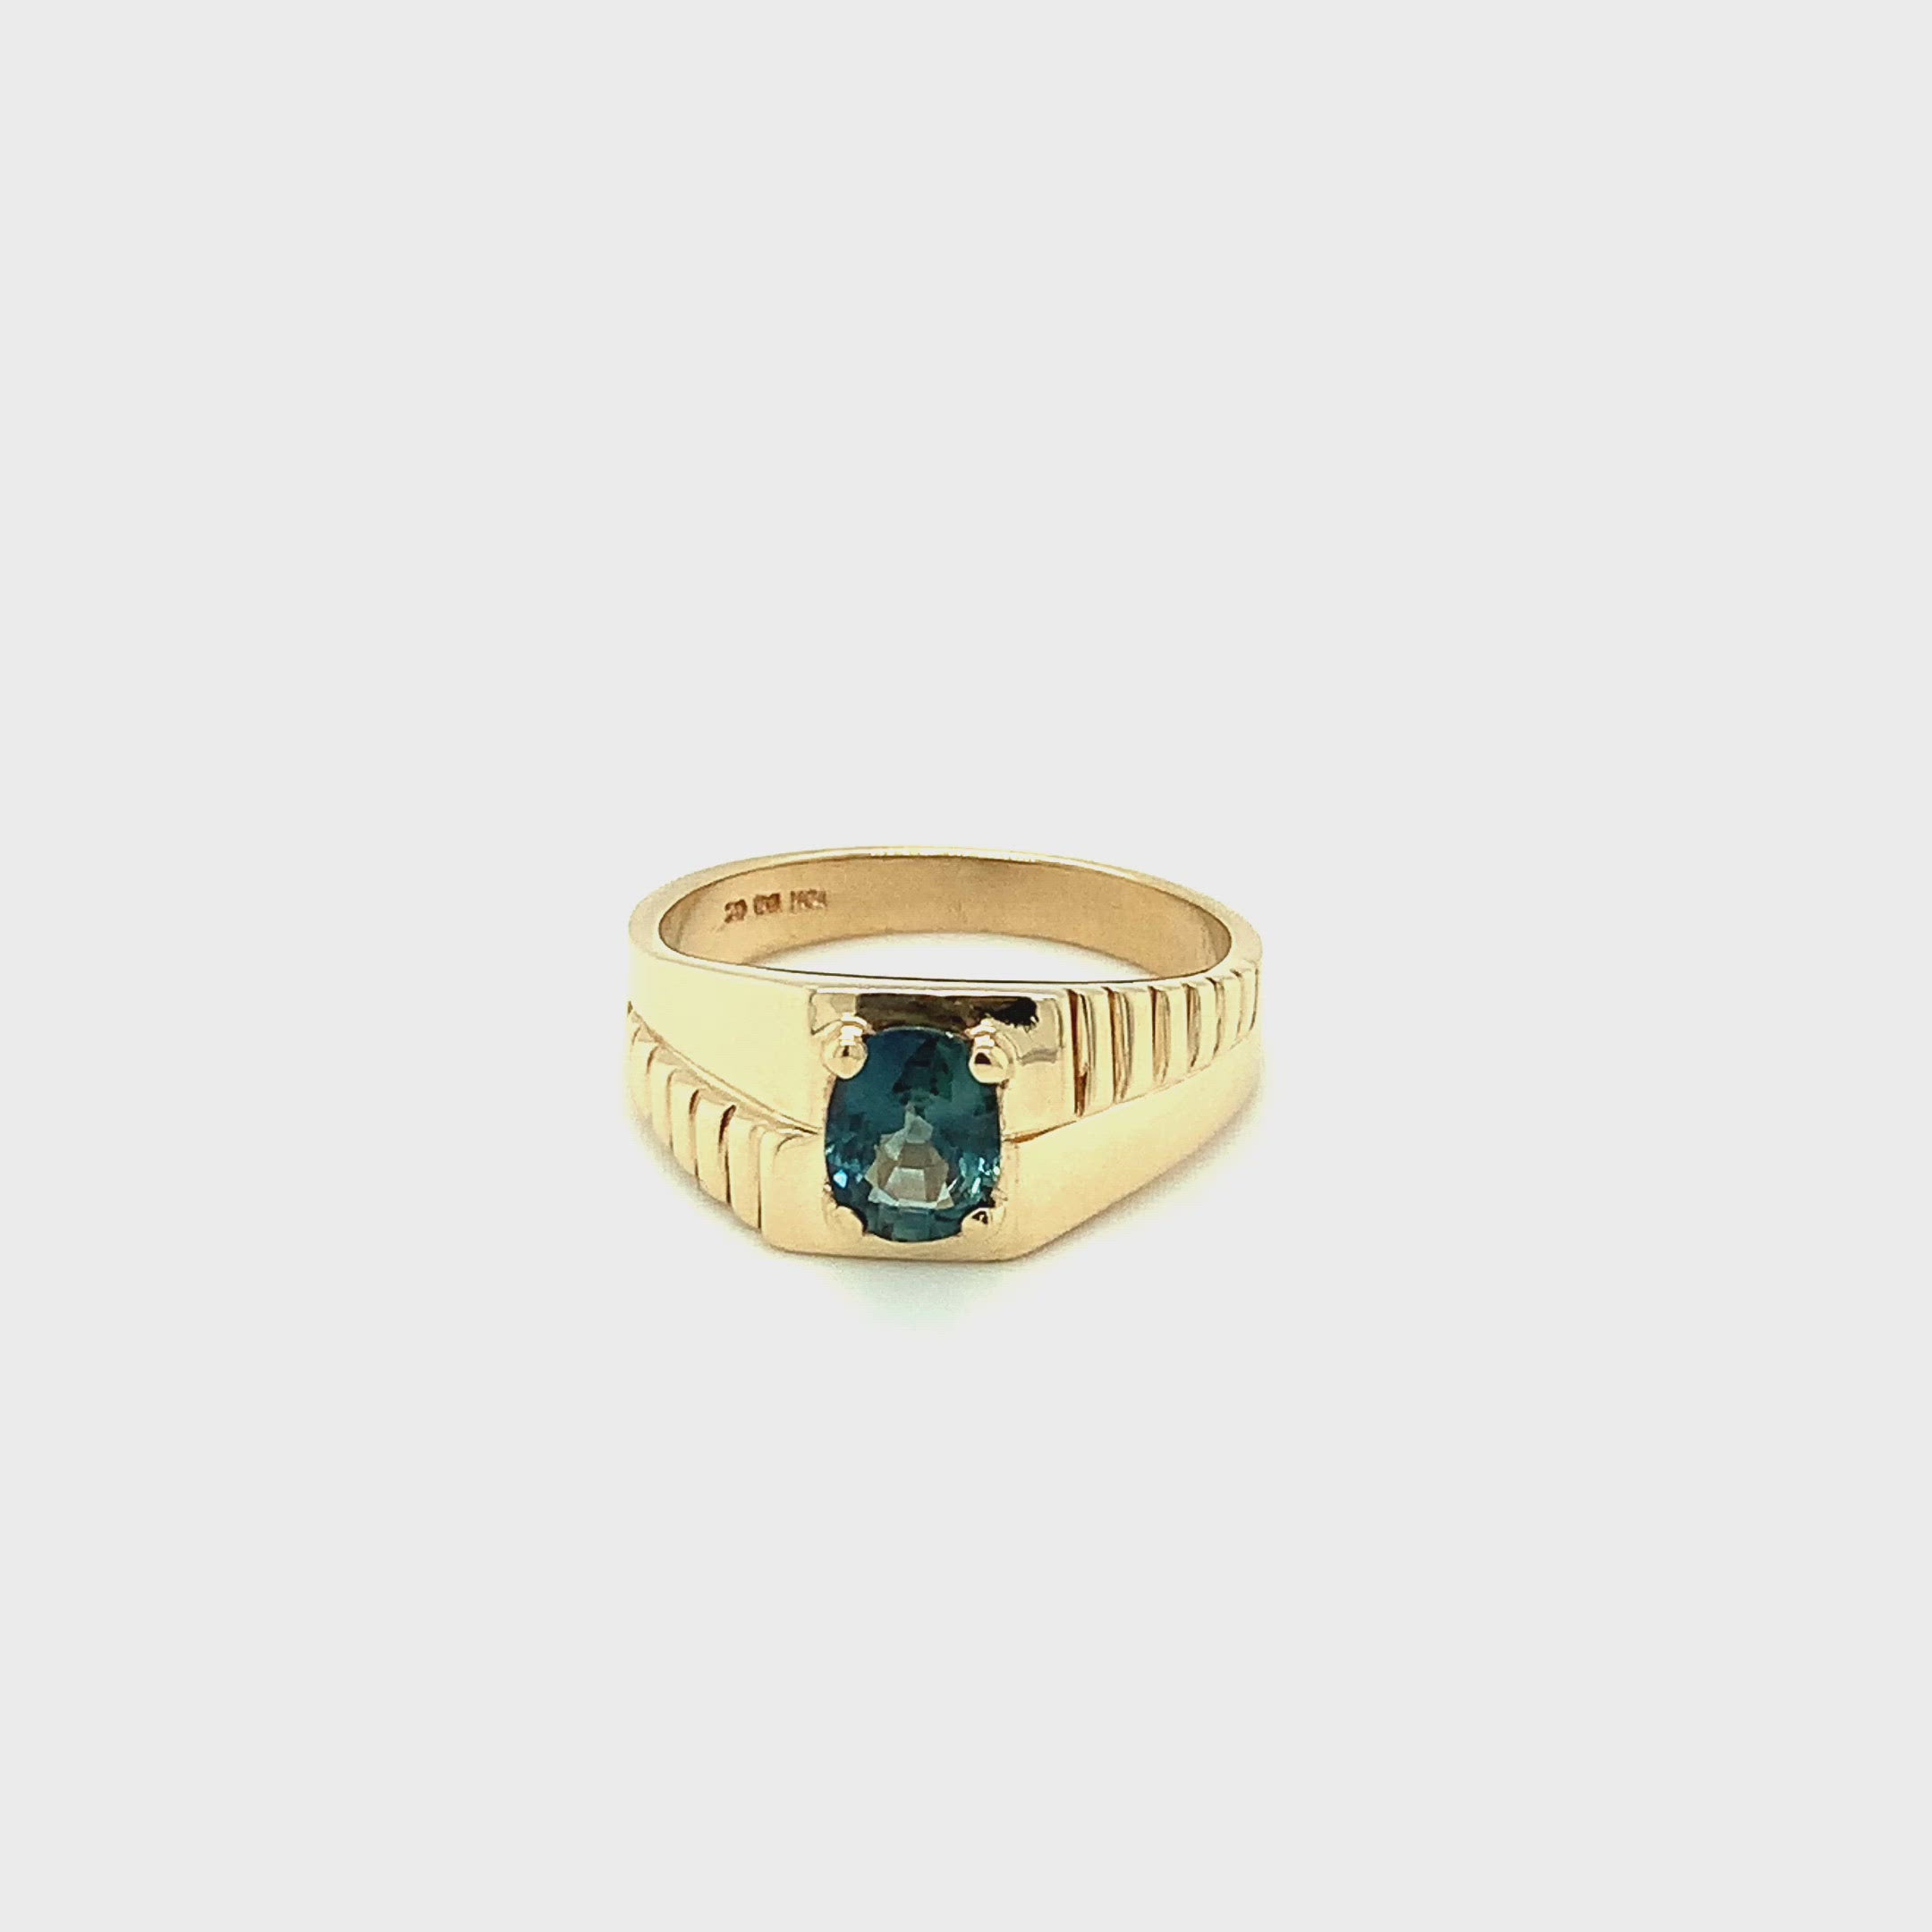 Natural Ceylon Sapphire Ring 10K Solid Gold 1.62ct Sri Lankan Sapphire Ring Solitaire Ring Gemstone Ring Statement Ring Men's Ring Jewellery